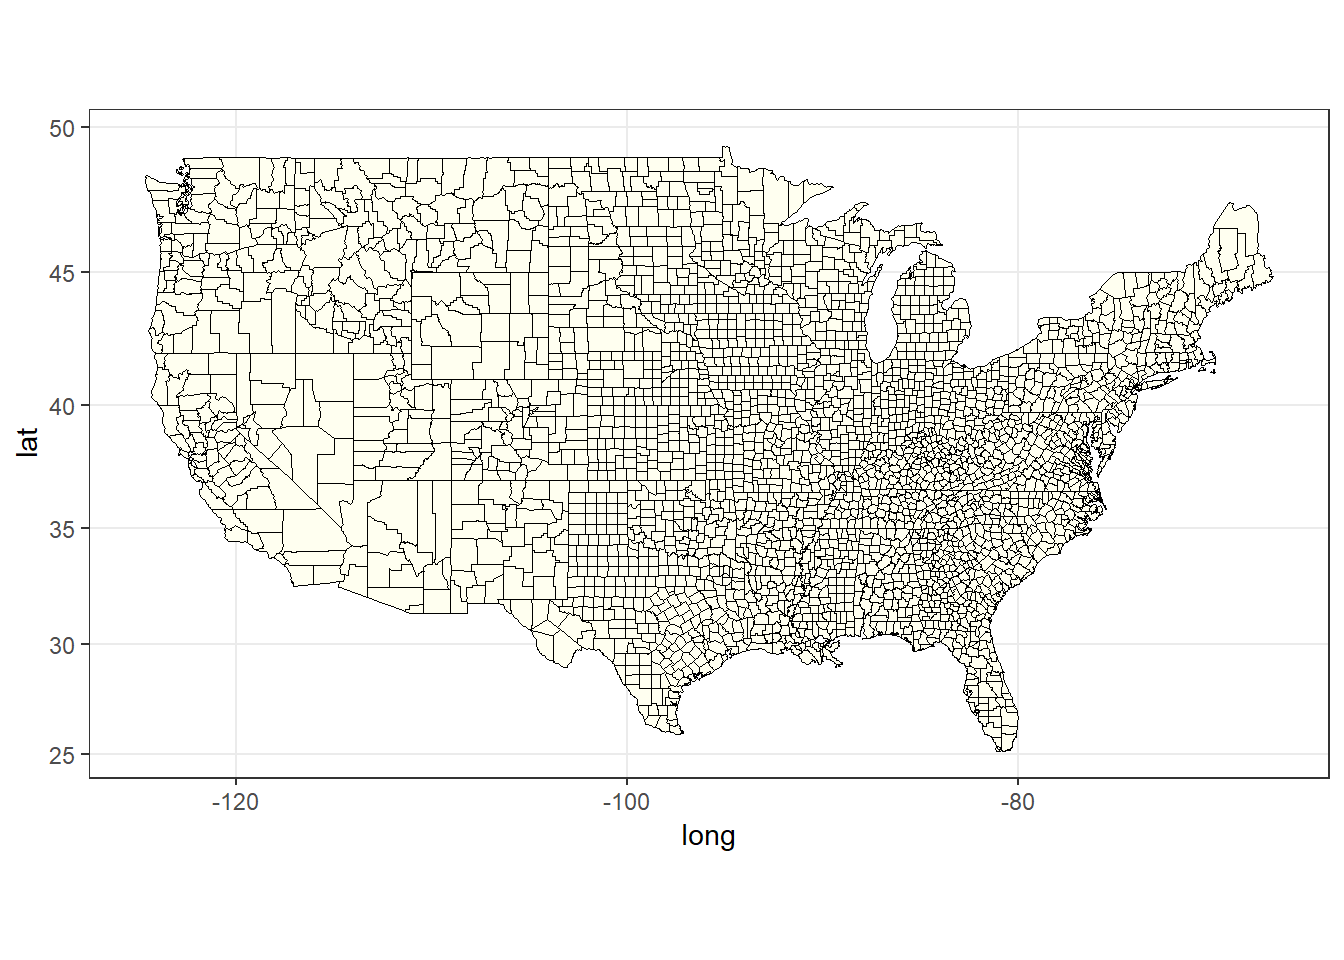 The plain county map of USA